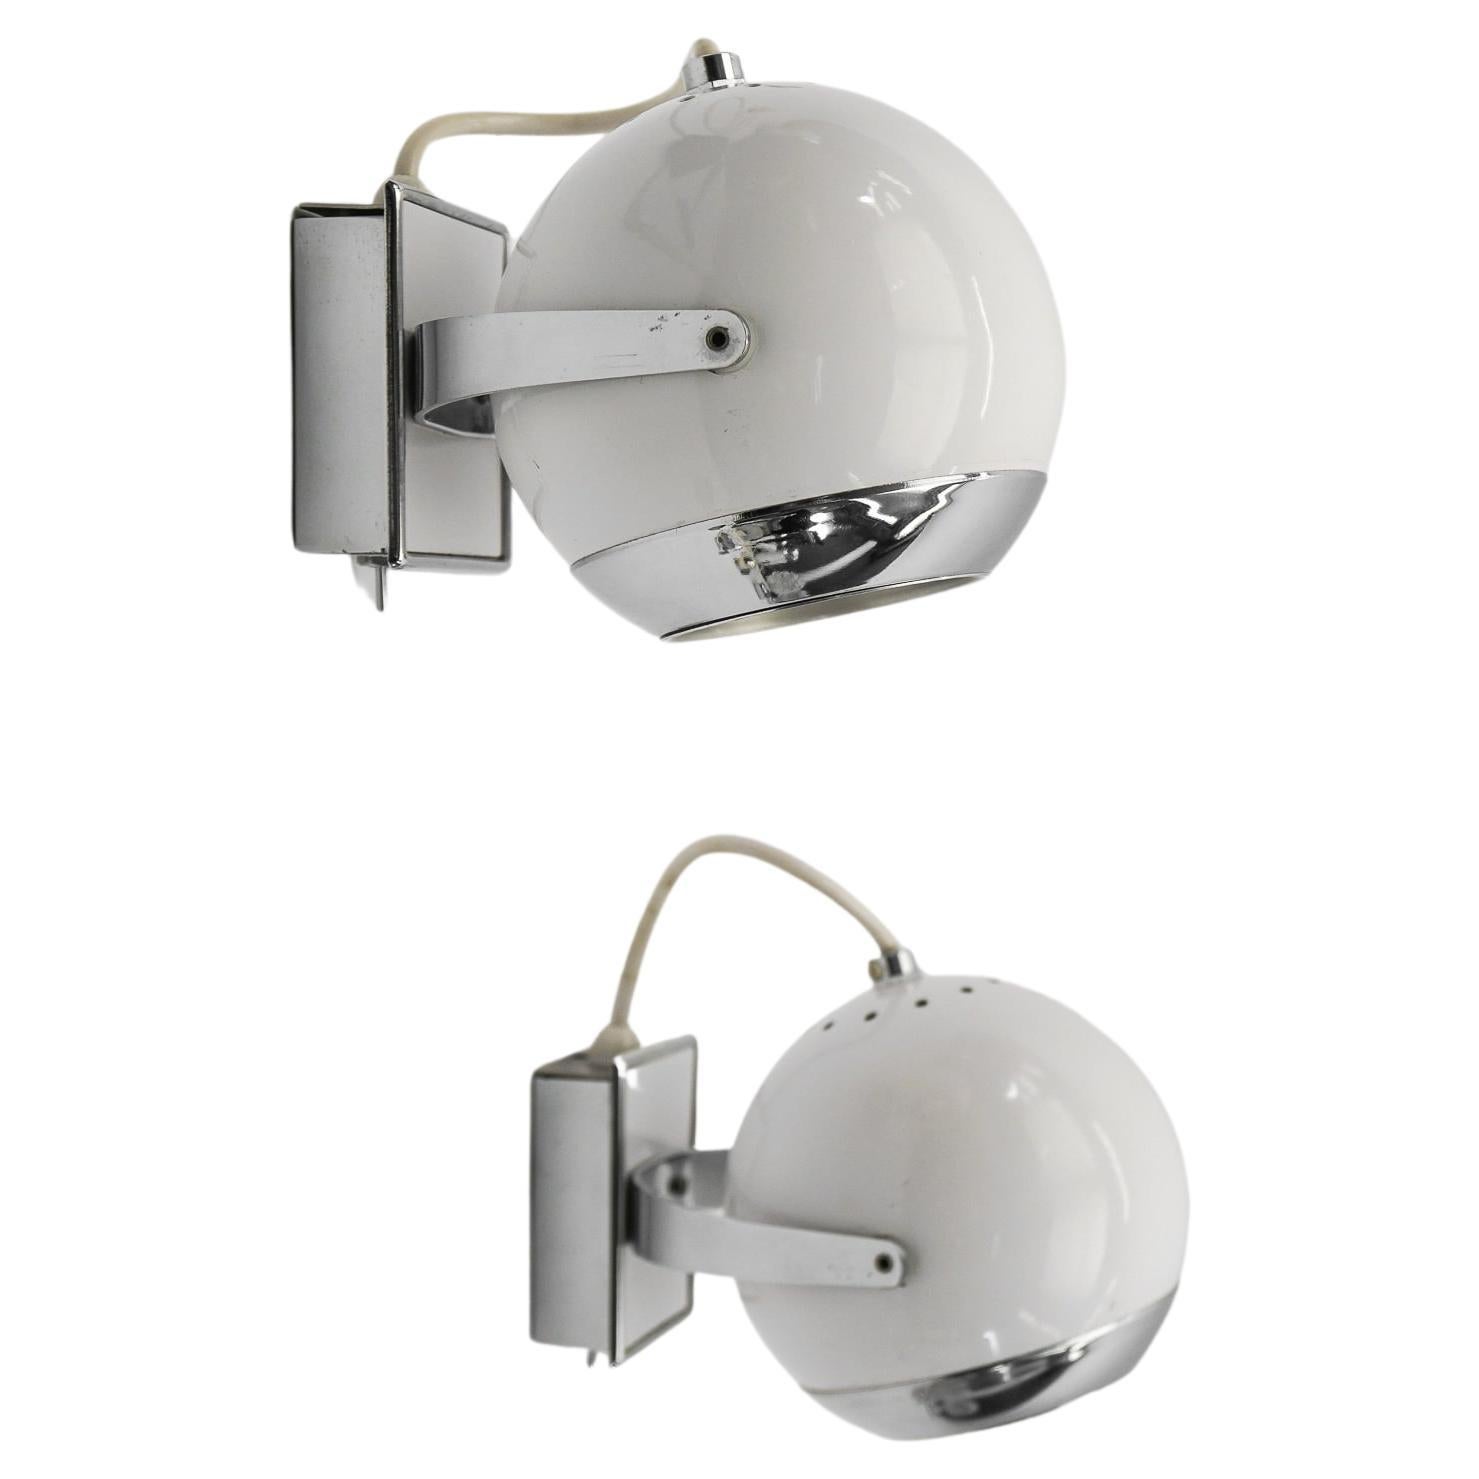 Pair of Space Age Ball Wall Lamps in White and Chrome, 1970s For Sale